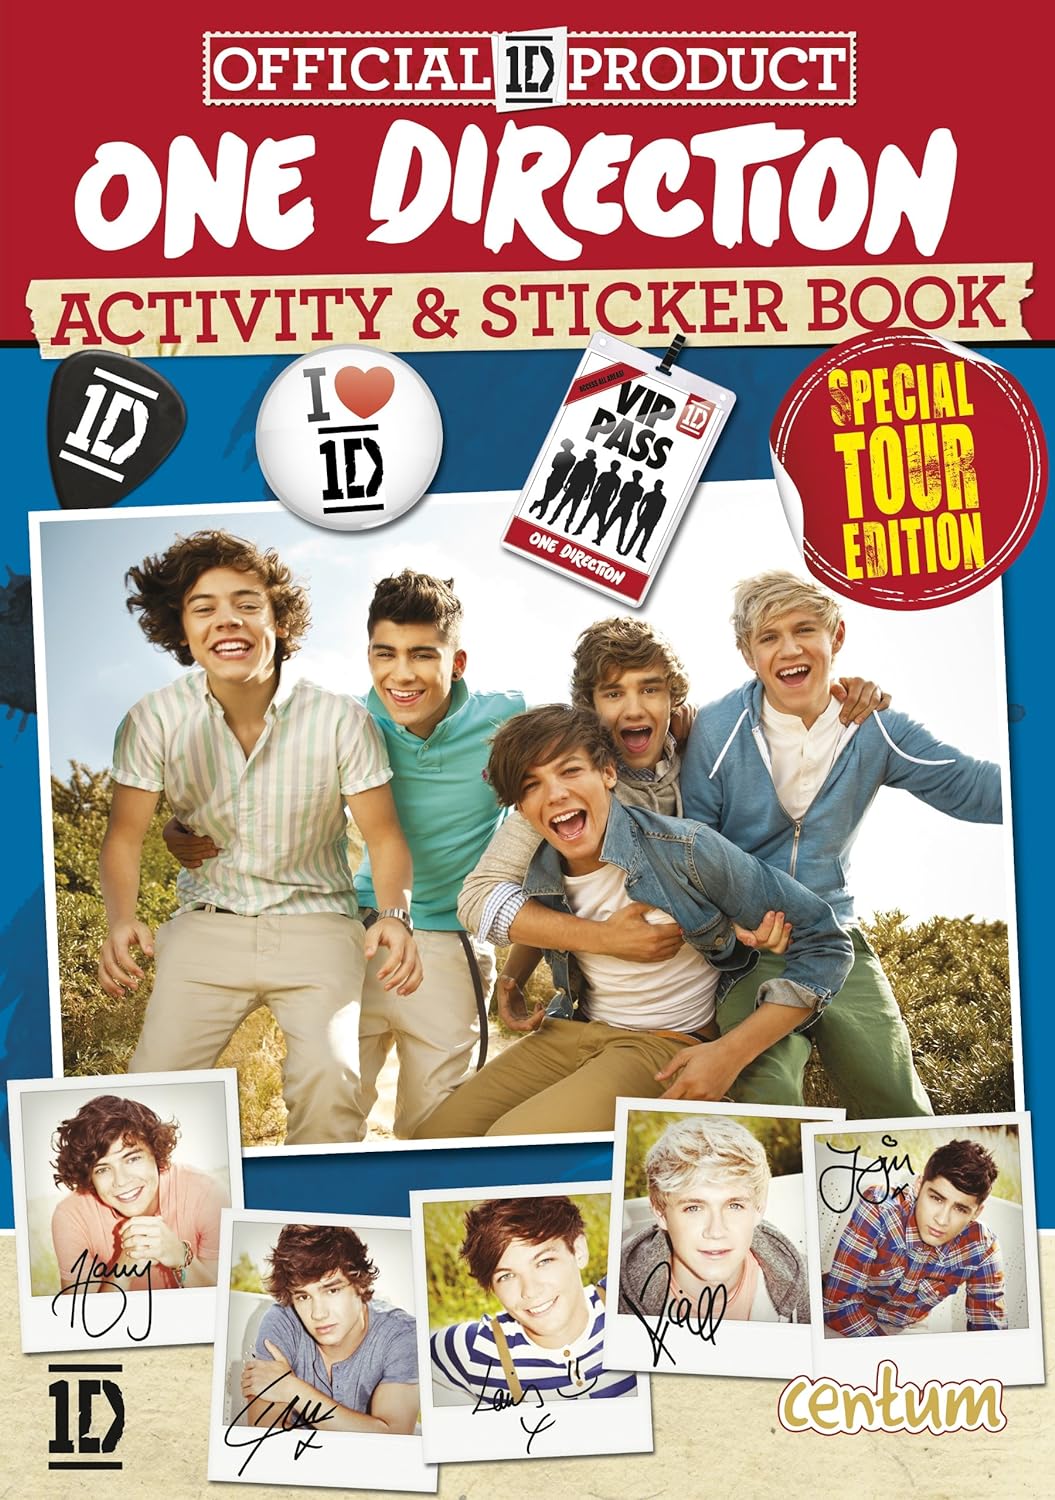 One Direction Activity and Sticker Book